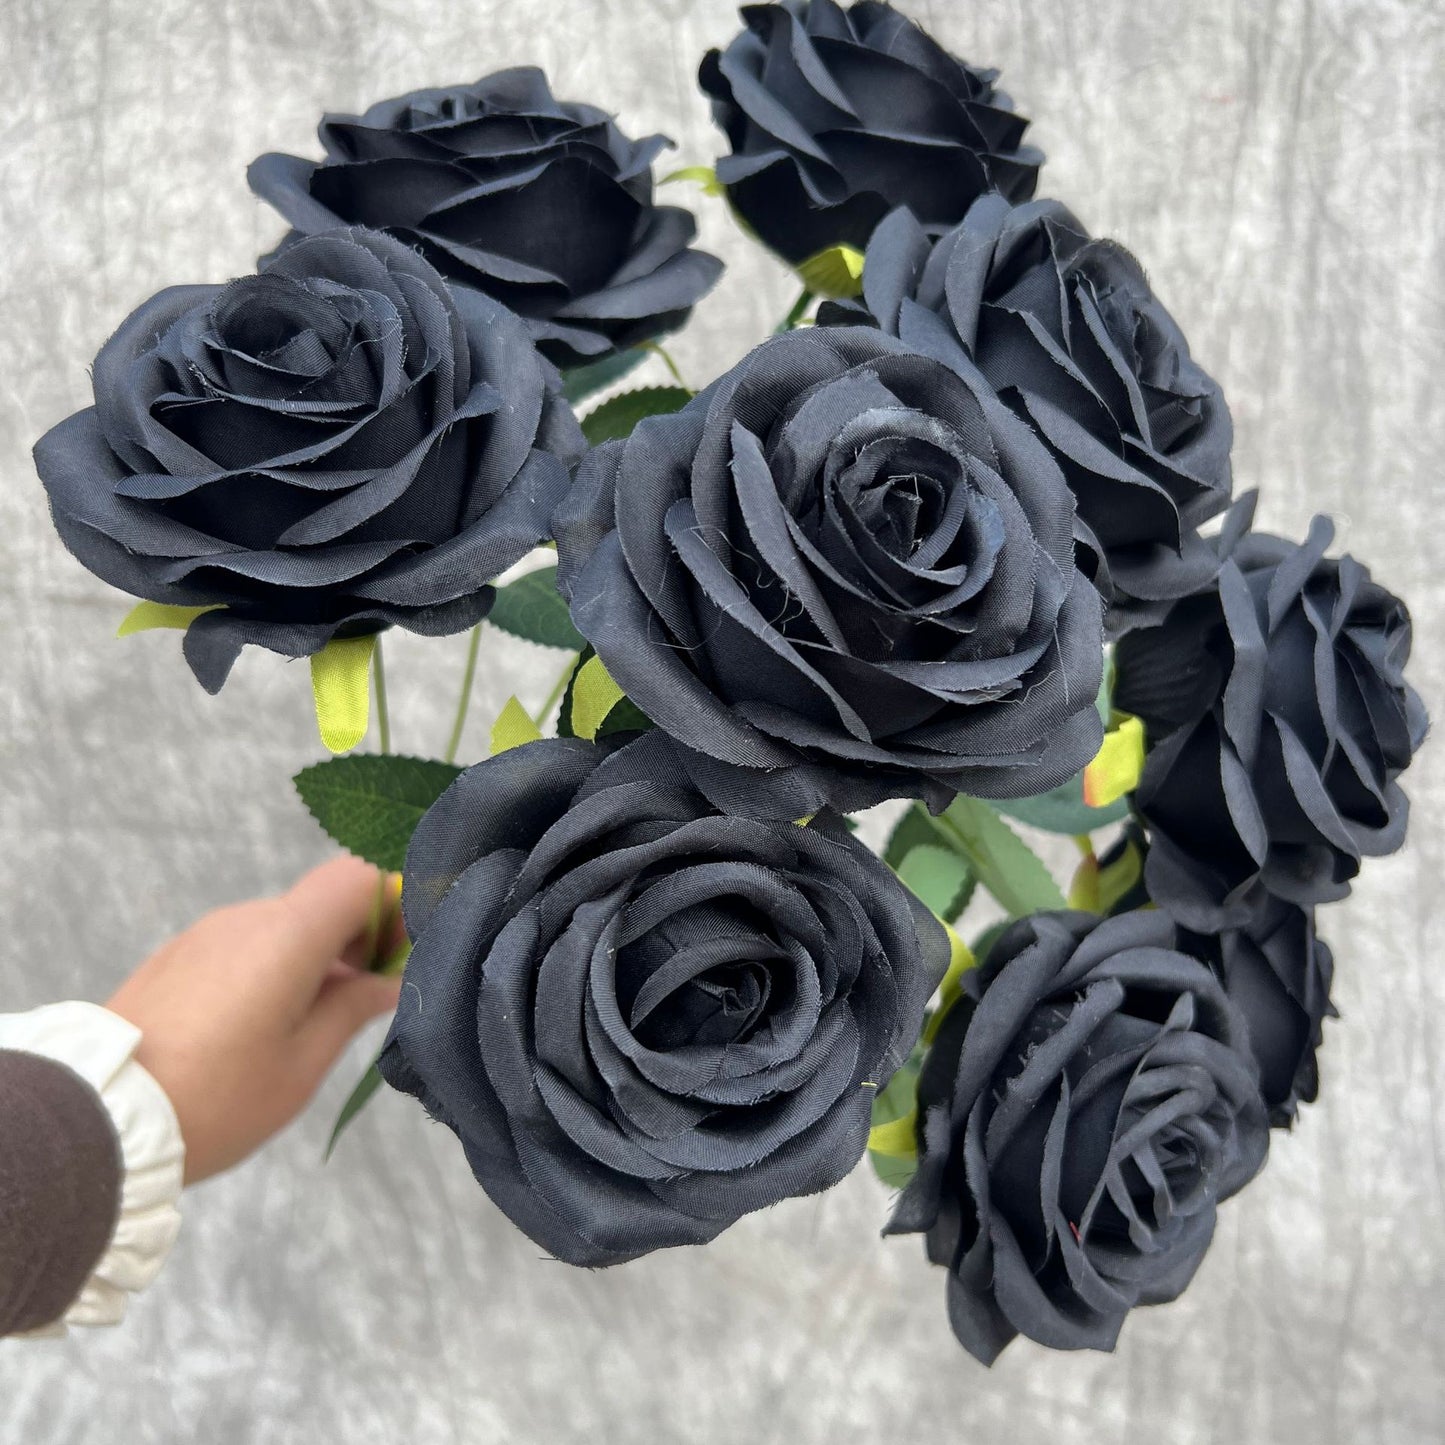 Uniquelina Artificial Rose and Flower Bouquets 9 Bunches Fake Summer Flowers Outdoor Greenery Decor for Wedding Home Office-Orange